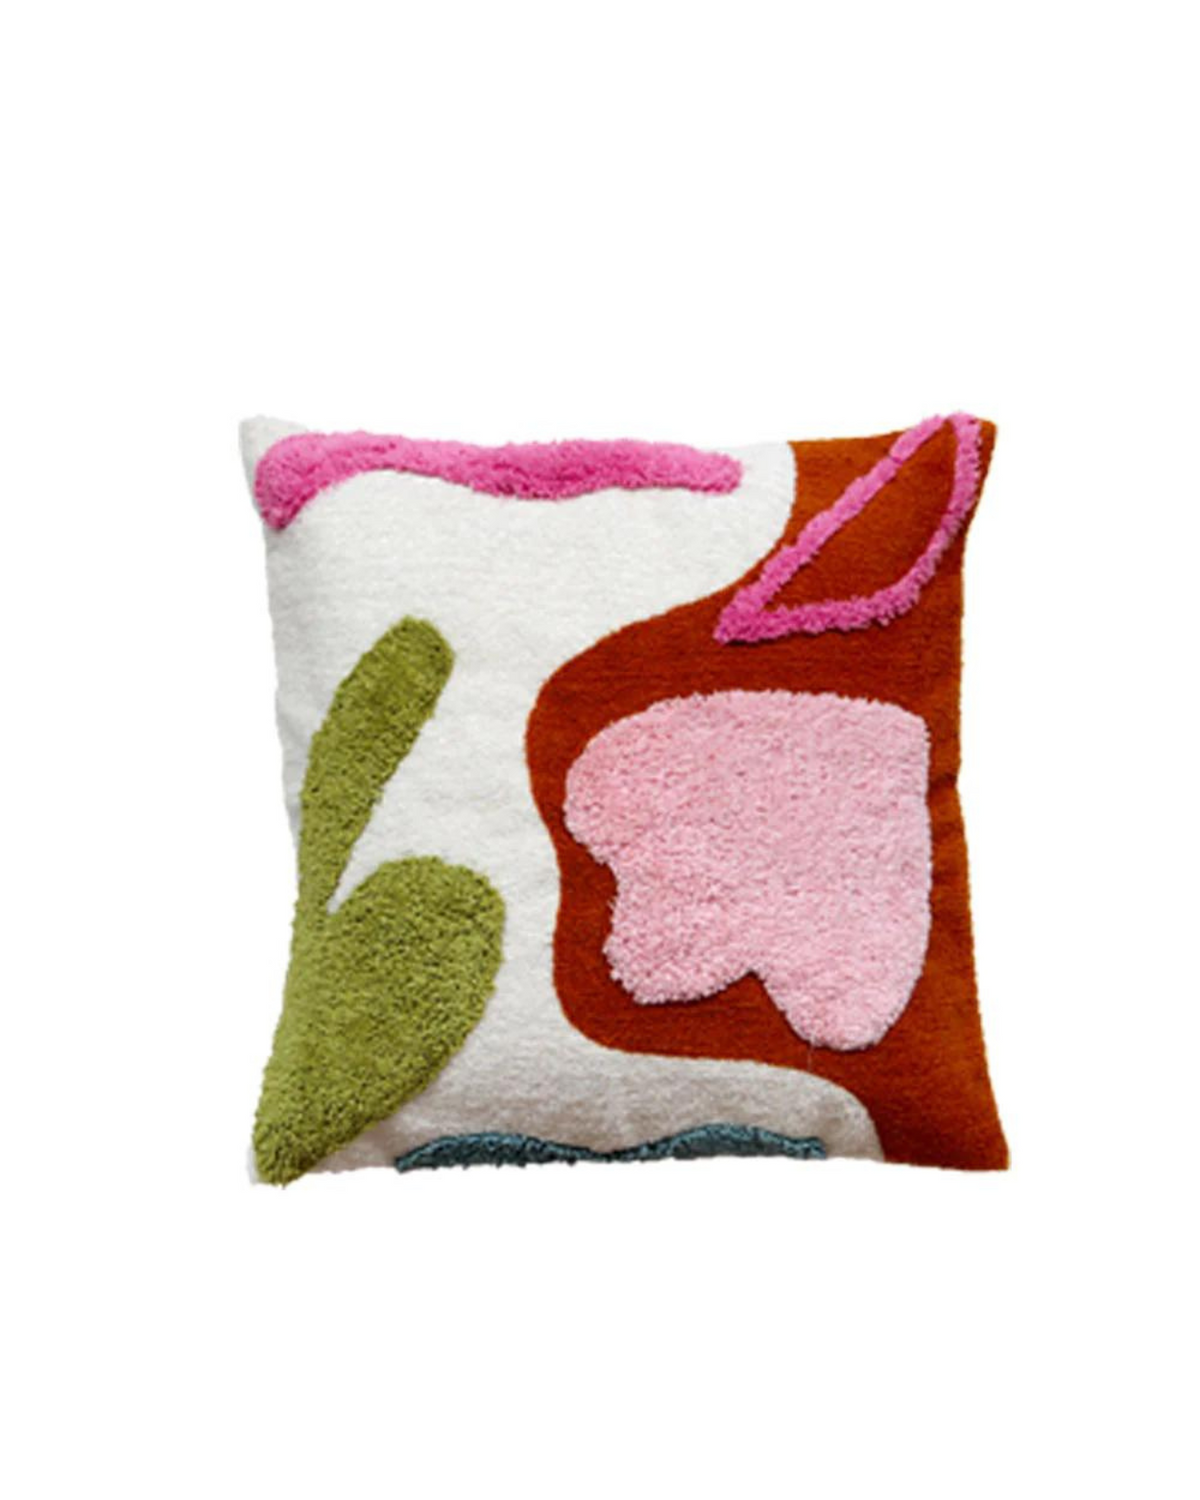 Add colour and style to your space with the Summer Fun Cushion. This 55cm square cushion features a boucle base, overlayed with cotton tufted panels and shapes. Perfect for kids' bedroom, the abstract design evokes memories of the seaside while the multi-coloured palette creates a bold aesthetic for kids interiors.